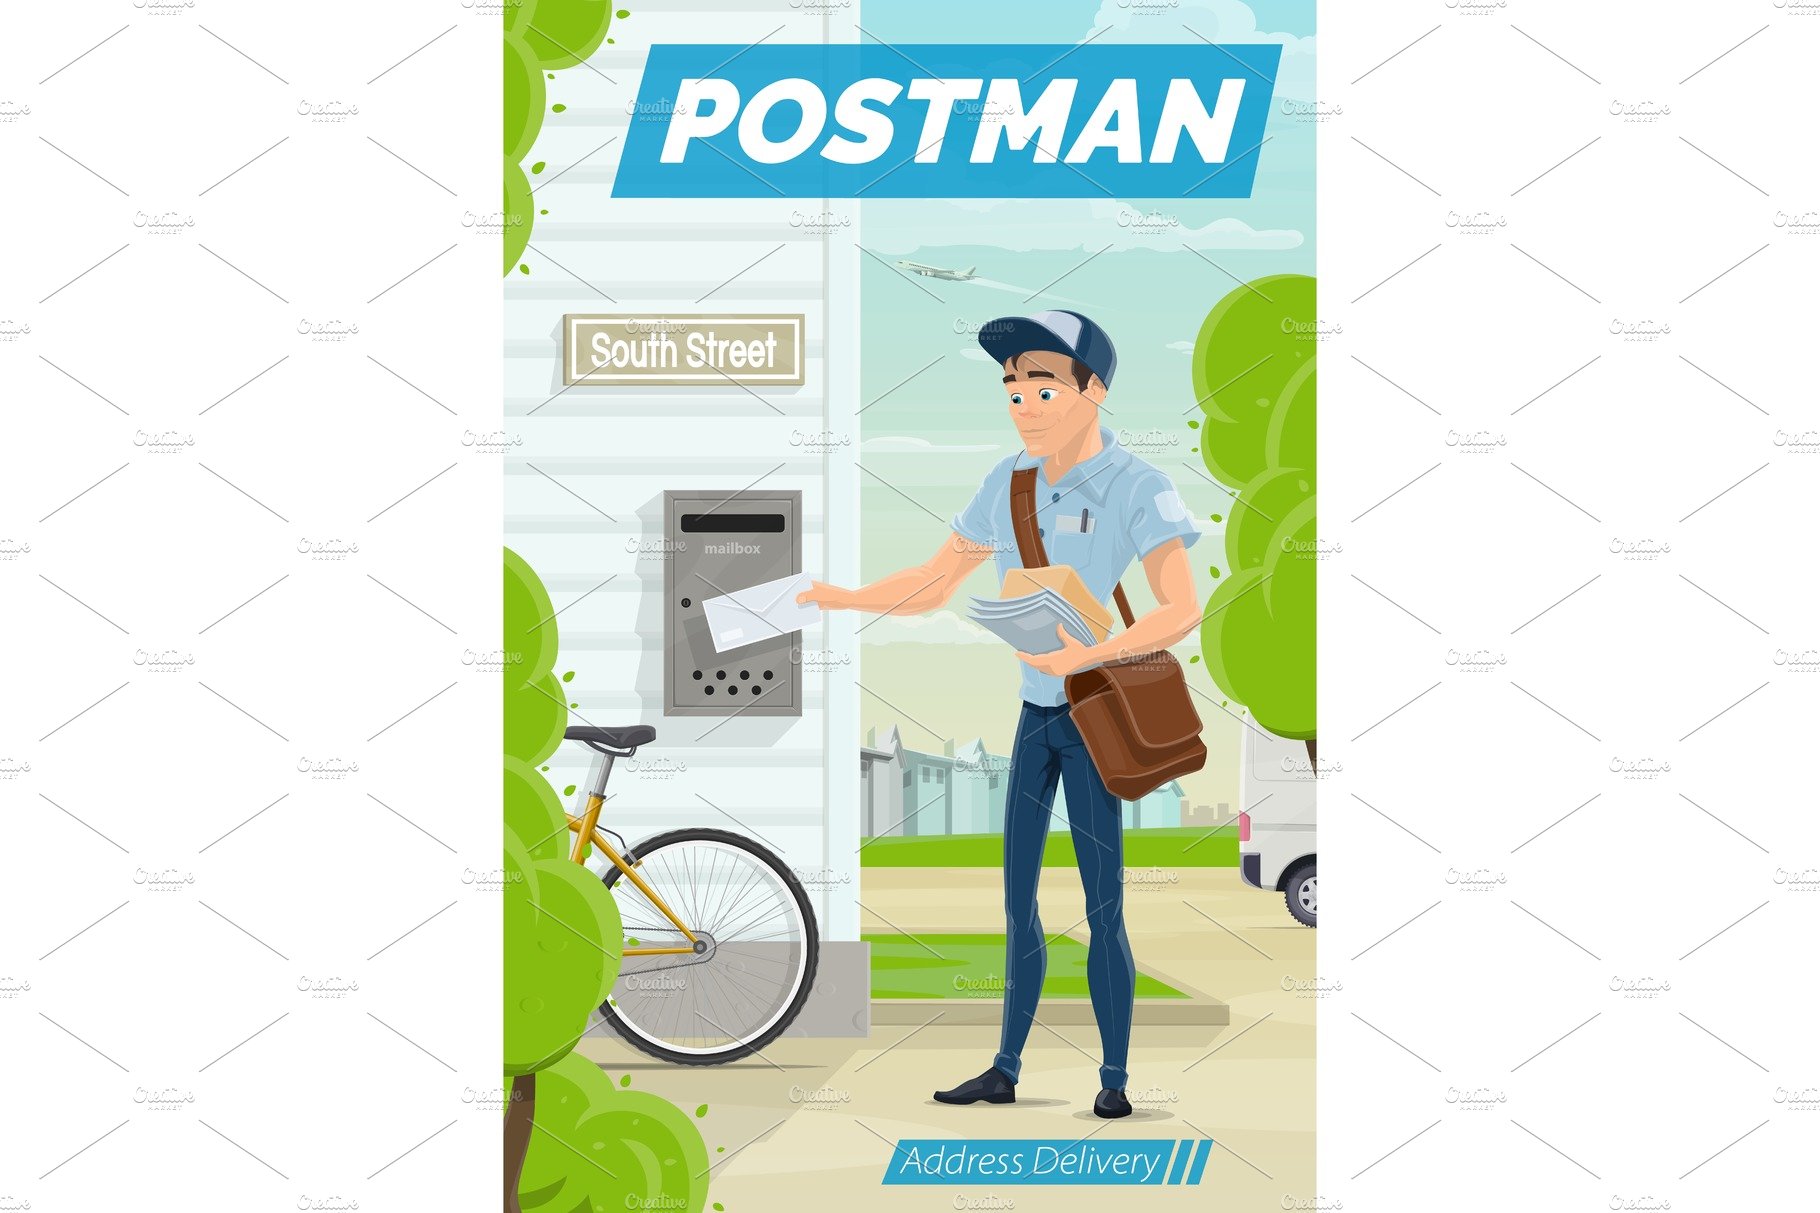 Delivery, postman with letter cover image.